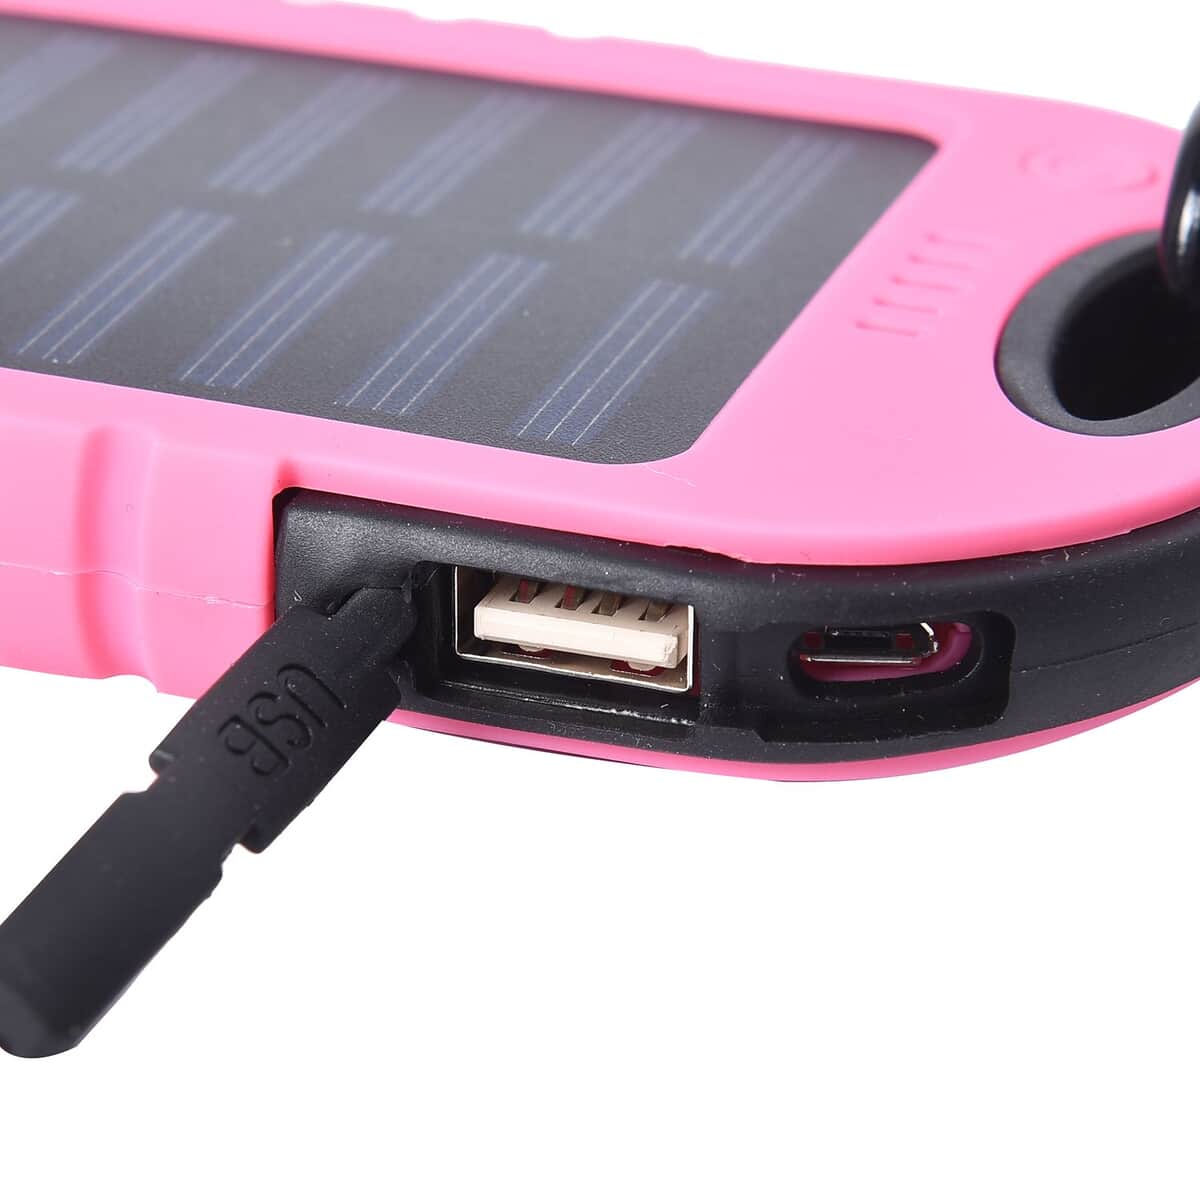 Homesmart Pink Carabiner Solar 5000 mAh Battery Charger with USB & Emergency LED Torch image number 5